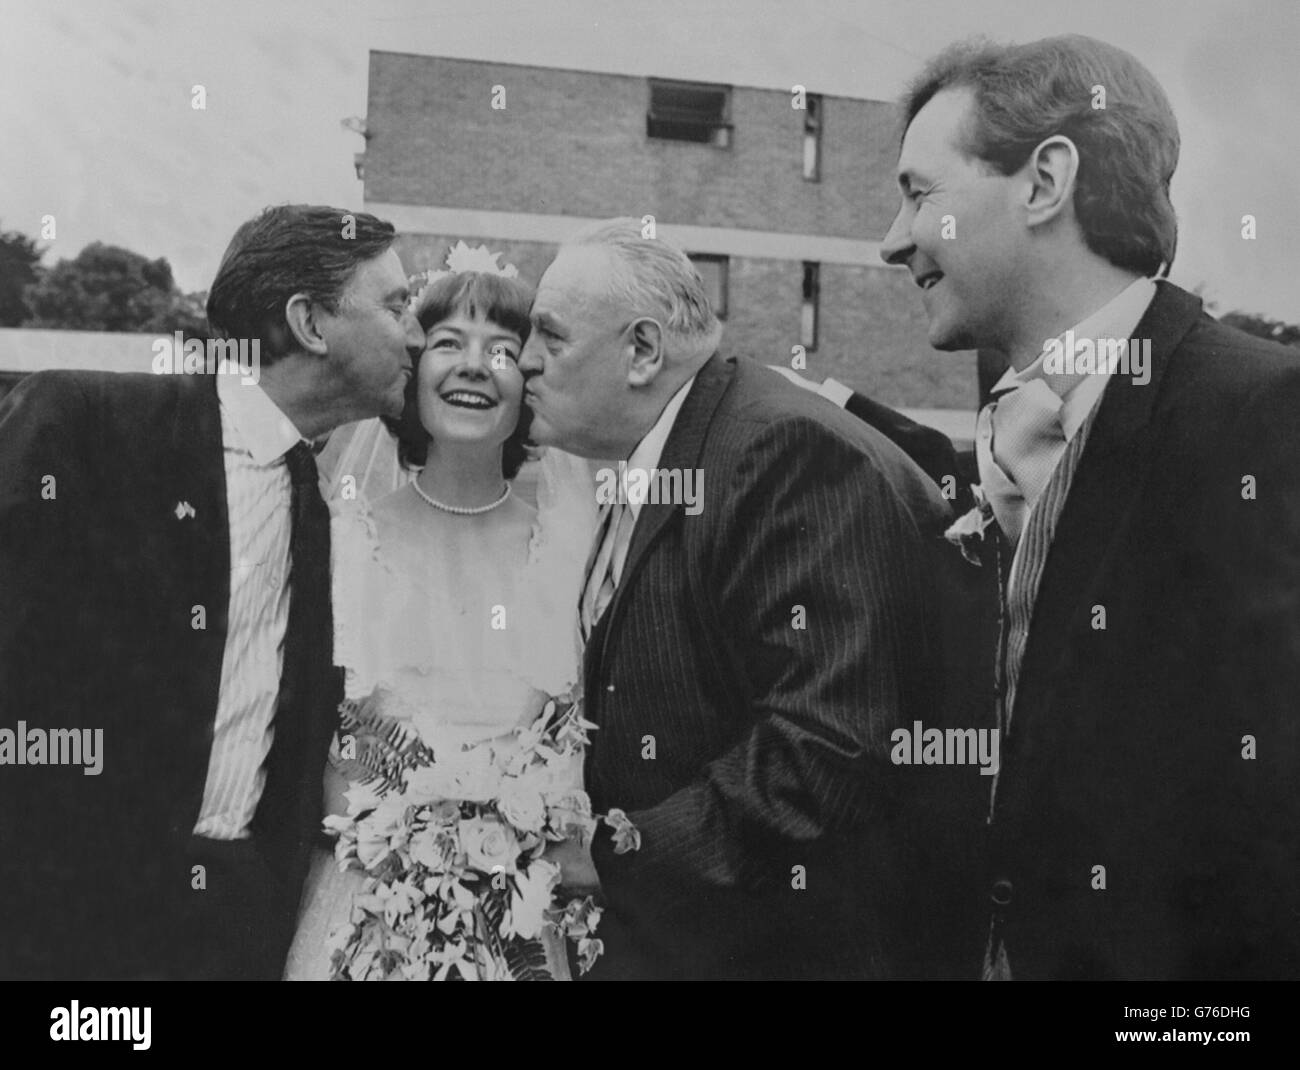 Social and Liberal Democrat MP David Alton looks on as SLD joint leader David Steel (r) and MP Cyril Smith steal a kiss from his bride, 34-year-old speech therapist Lizzie Bell, after their wedding in the chapel of Christ and Notre Dame College in Woolton, Liverpool. Stock Photo